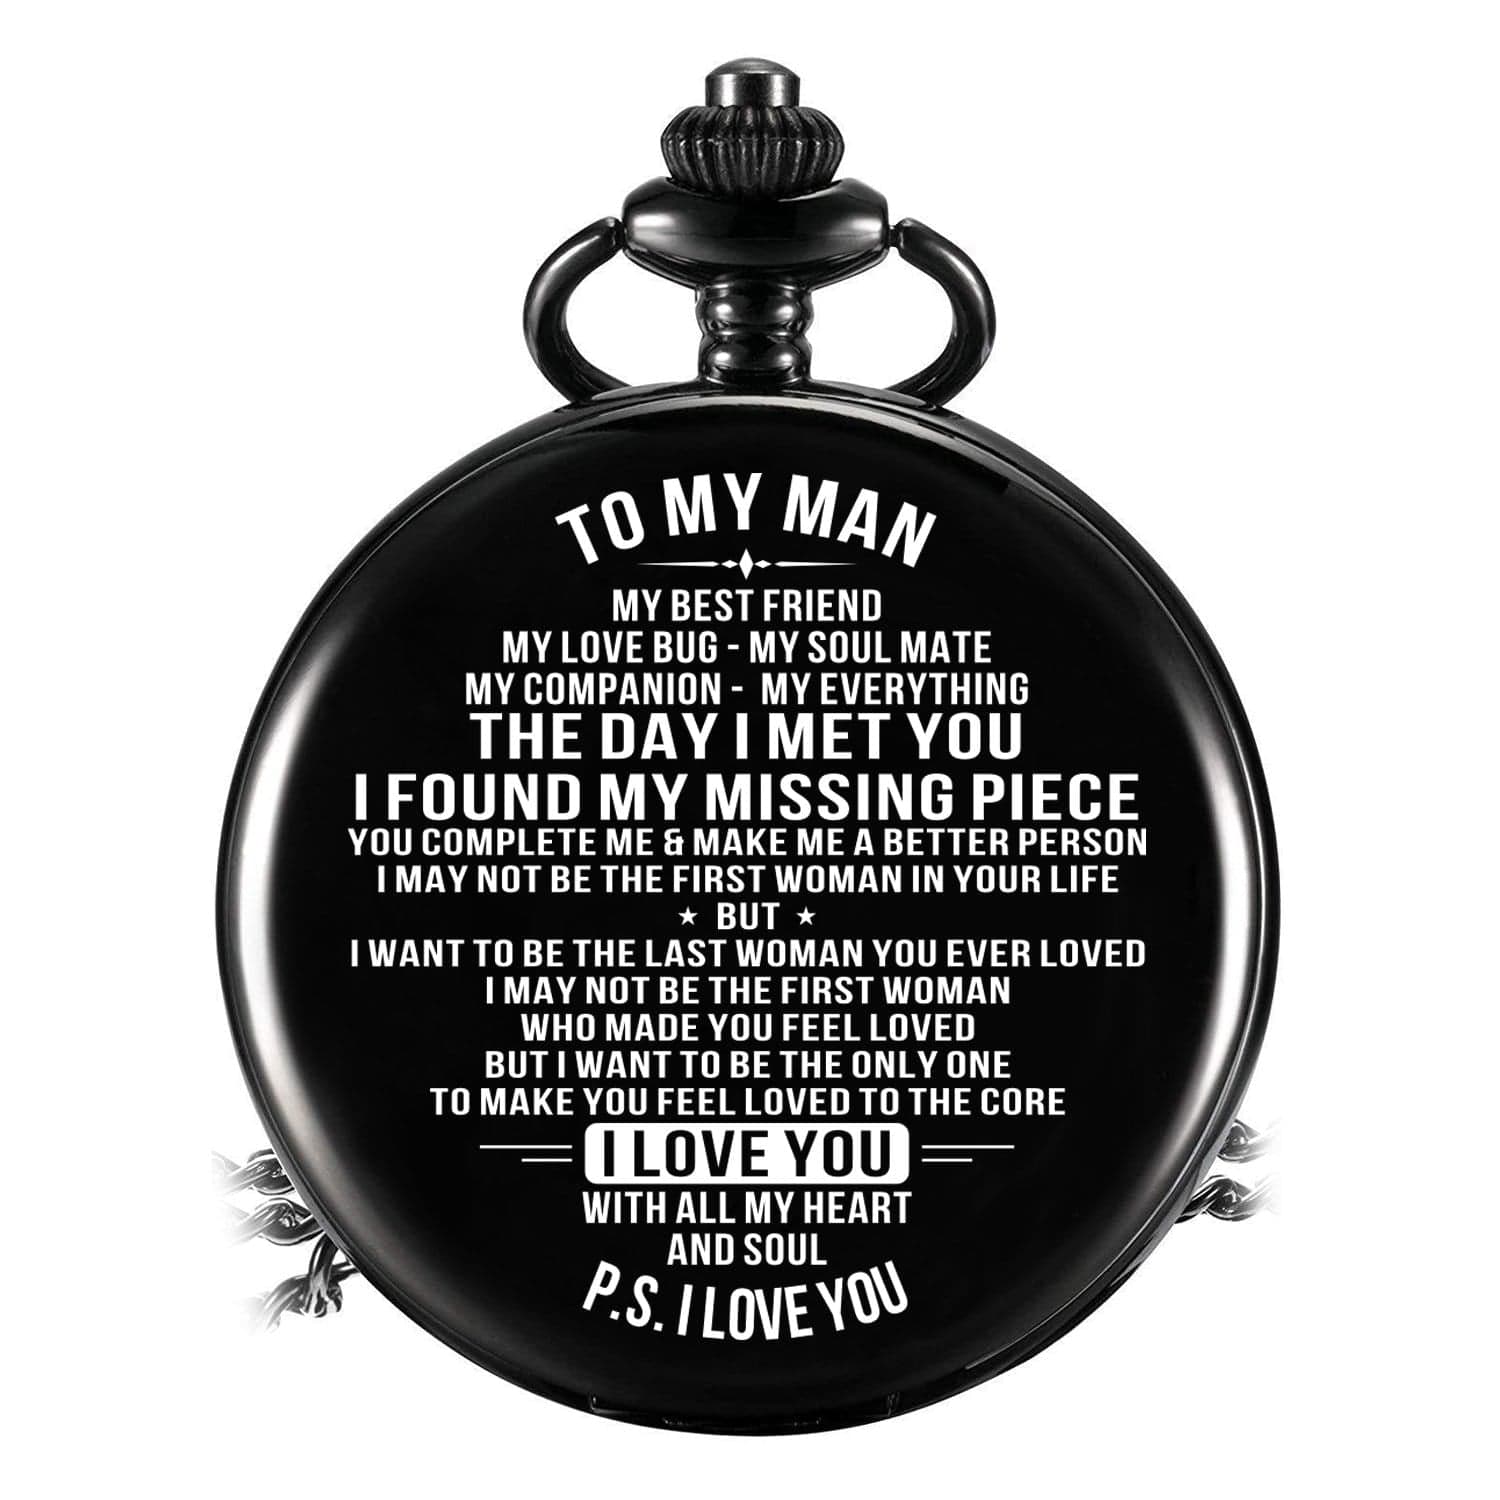 Pocket Watches For Lovers To My Man - I Found My Missing Piece Pocket Watch GiveMe-Gifts